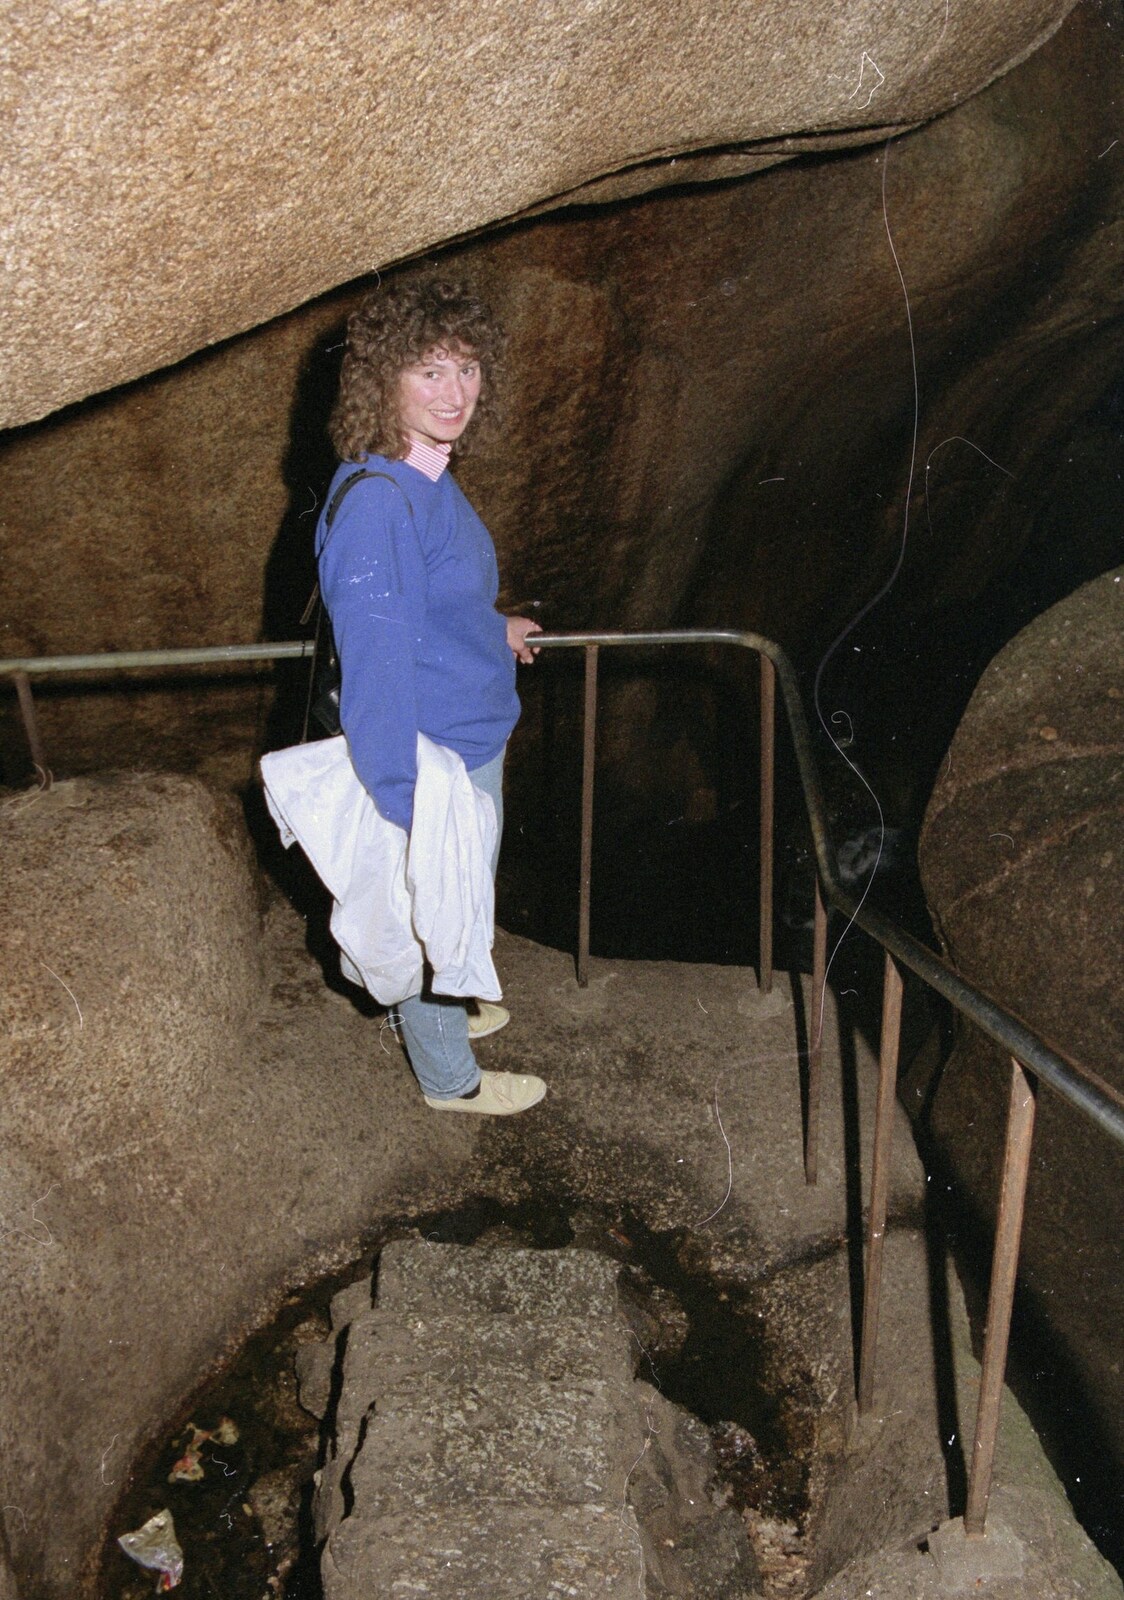 A Trip To Huelgoat, Brittany, France - 11th June 1990: Another cave scene